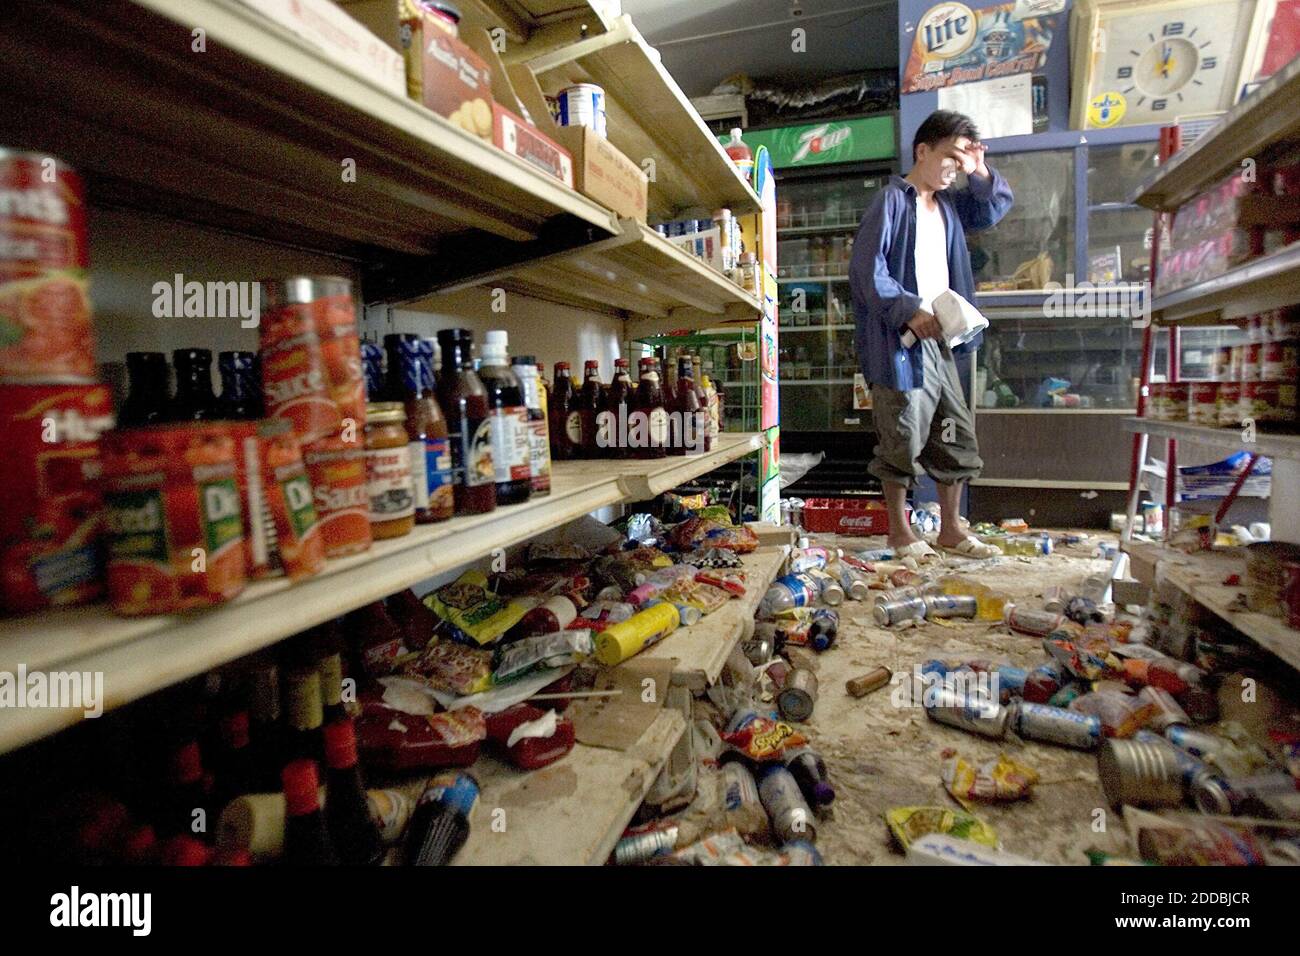 NO FILM, NO VIDEO, NO TV, NO DOCUMENTARY - Convenience store owner Hai Pham looks over the damage caused to his business by flood water and looters along St. Claude Ave in New Orleans Friday, September 16, 2005. Photo by NG Norman/Kansas City Star/KRT/ABACAPRESS.COM. Stock Photo